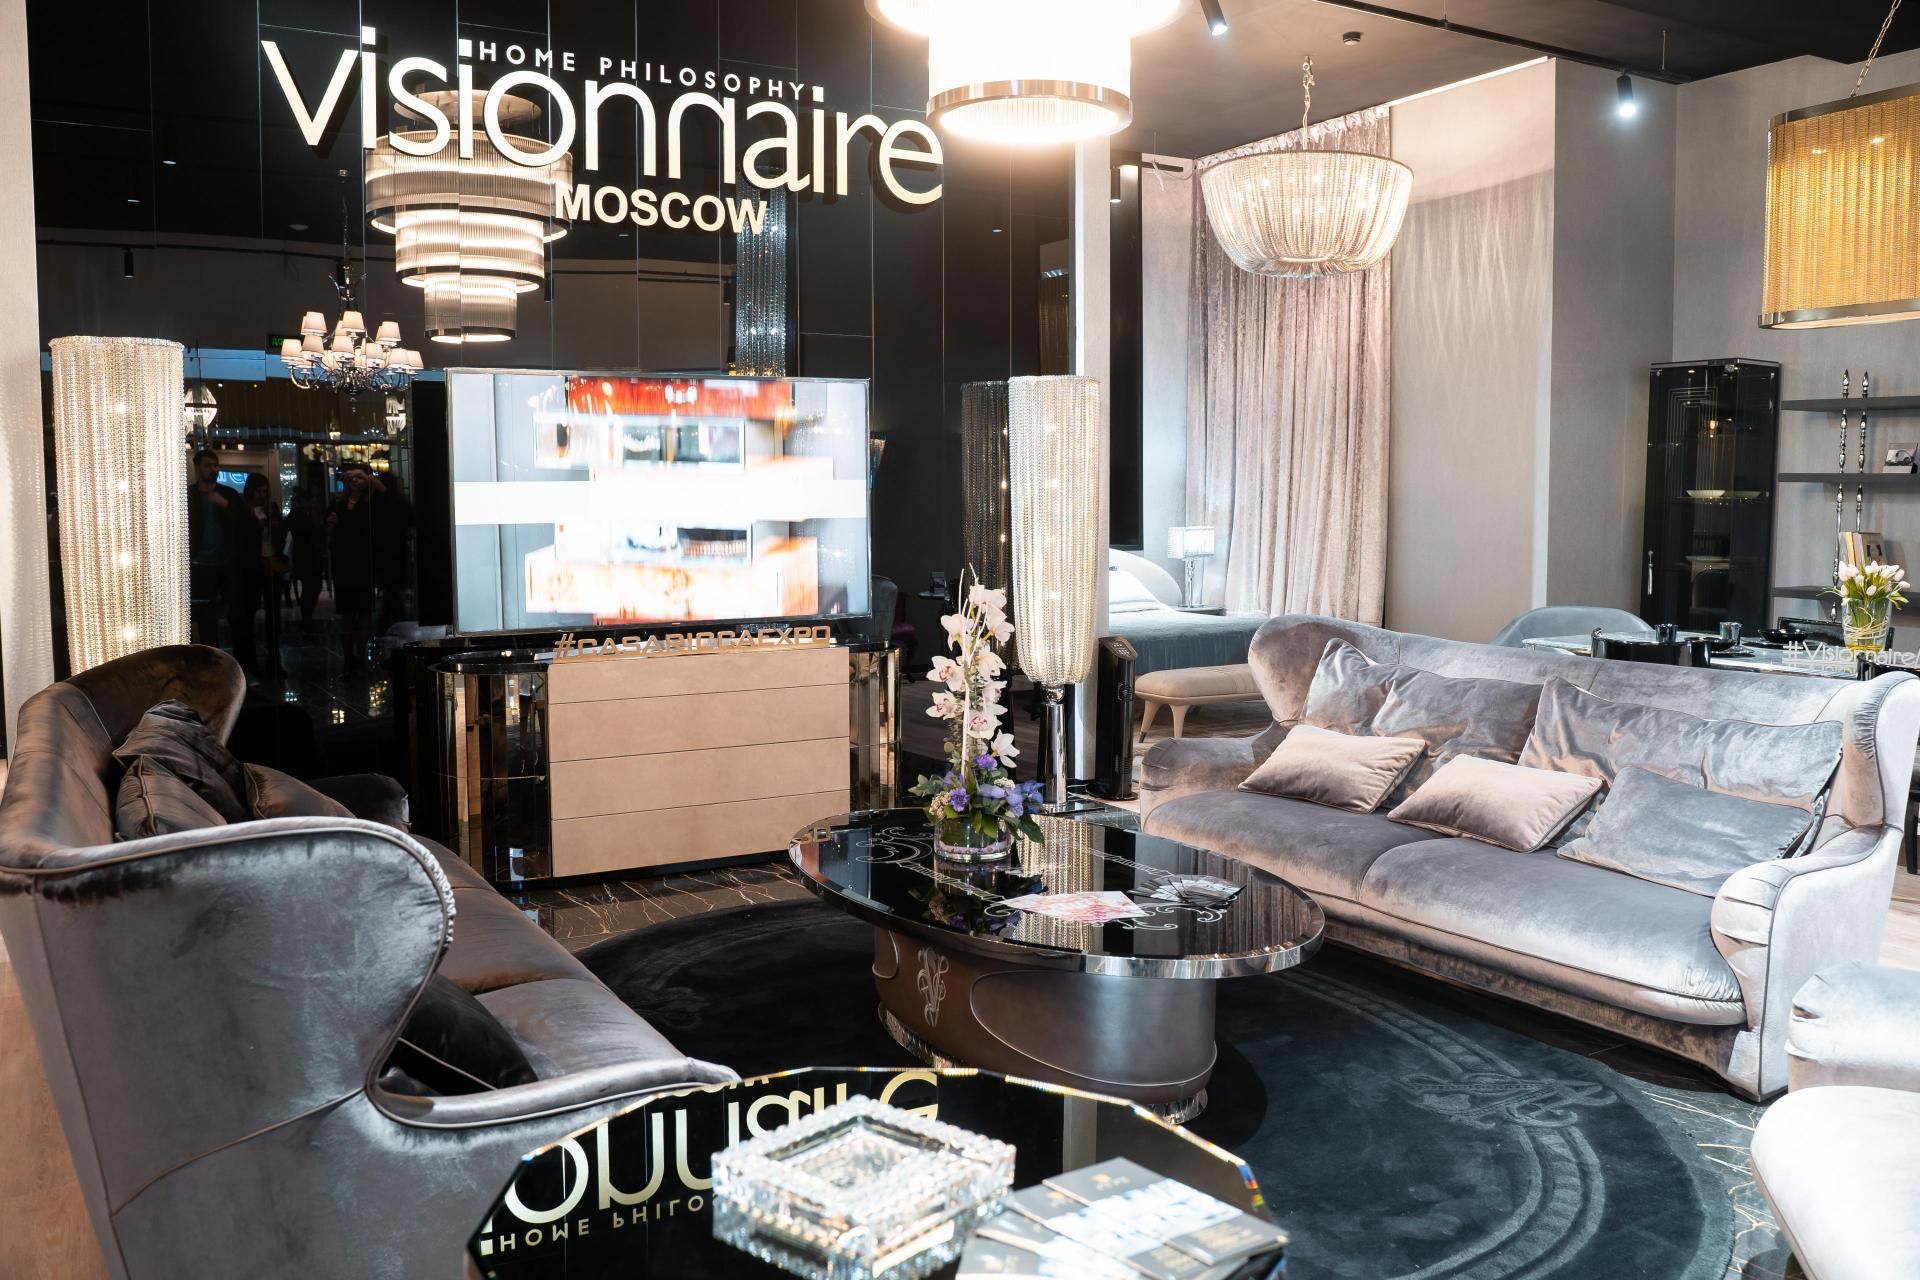 Visionnaire Moscow